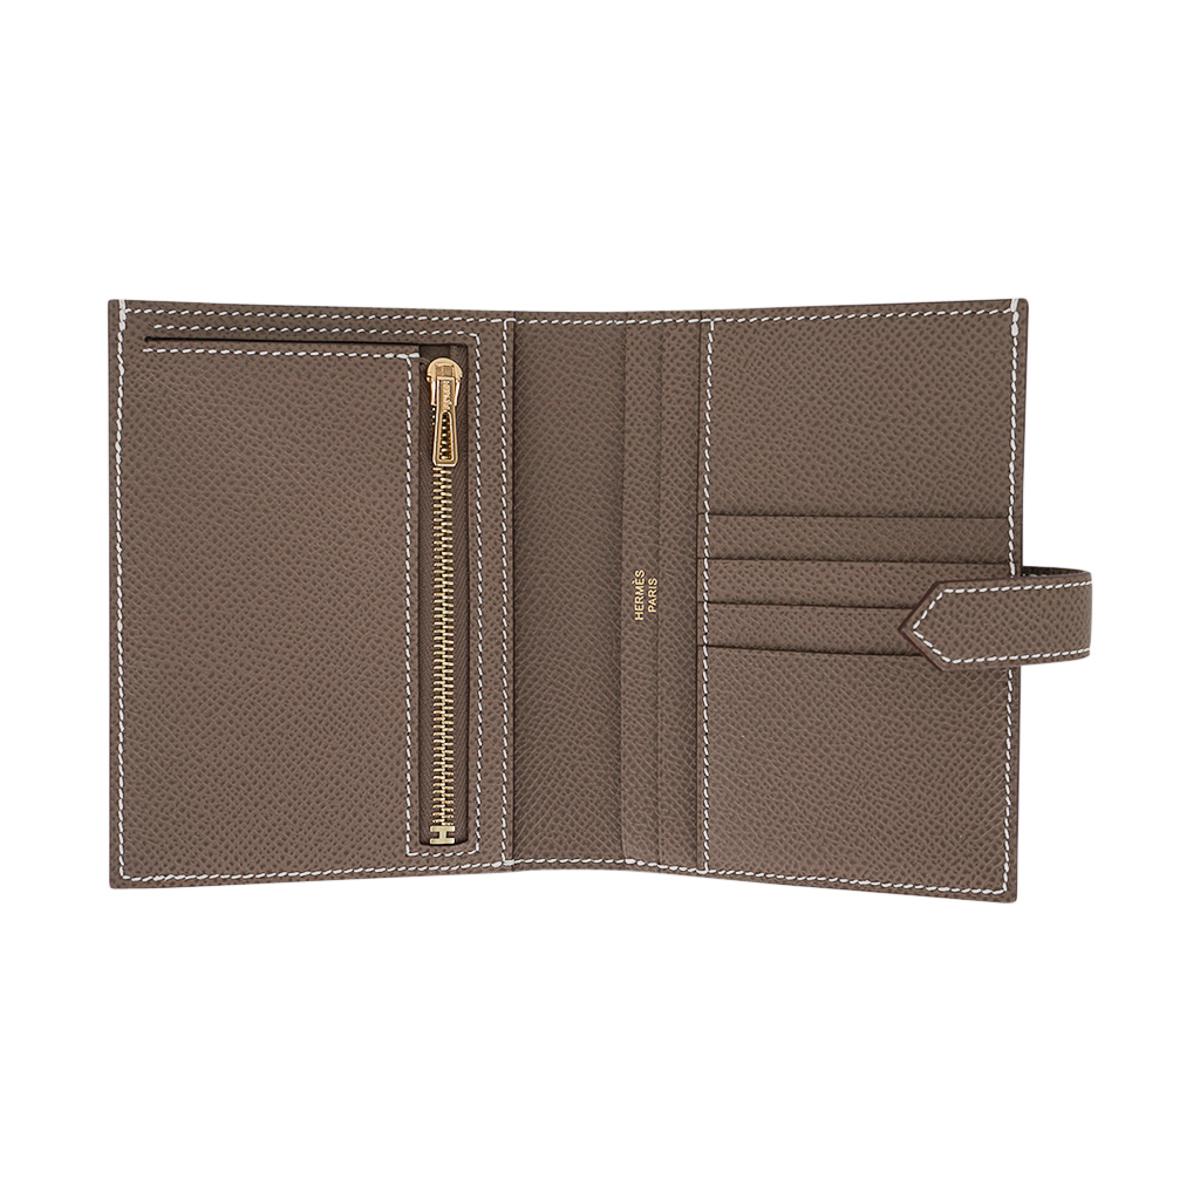 Mightychic offers an Hermes Bearn compact wallet featured in Etoupe and Epsom leather.
White topstitch.
This classic wallet has Gold hardware.
4 credit card slots and 4 pockets.
1 bill pocket.
Zip change purse.
New or Pristine Store Fresh